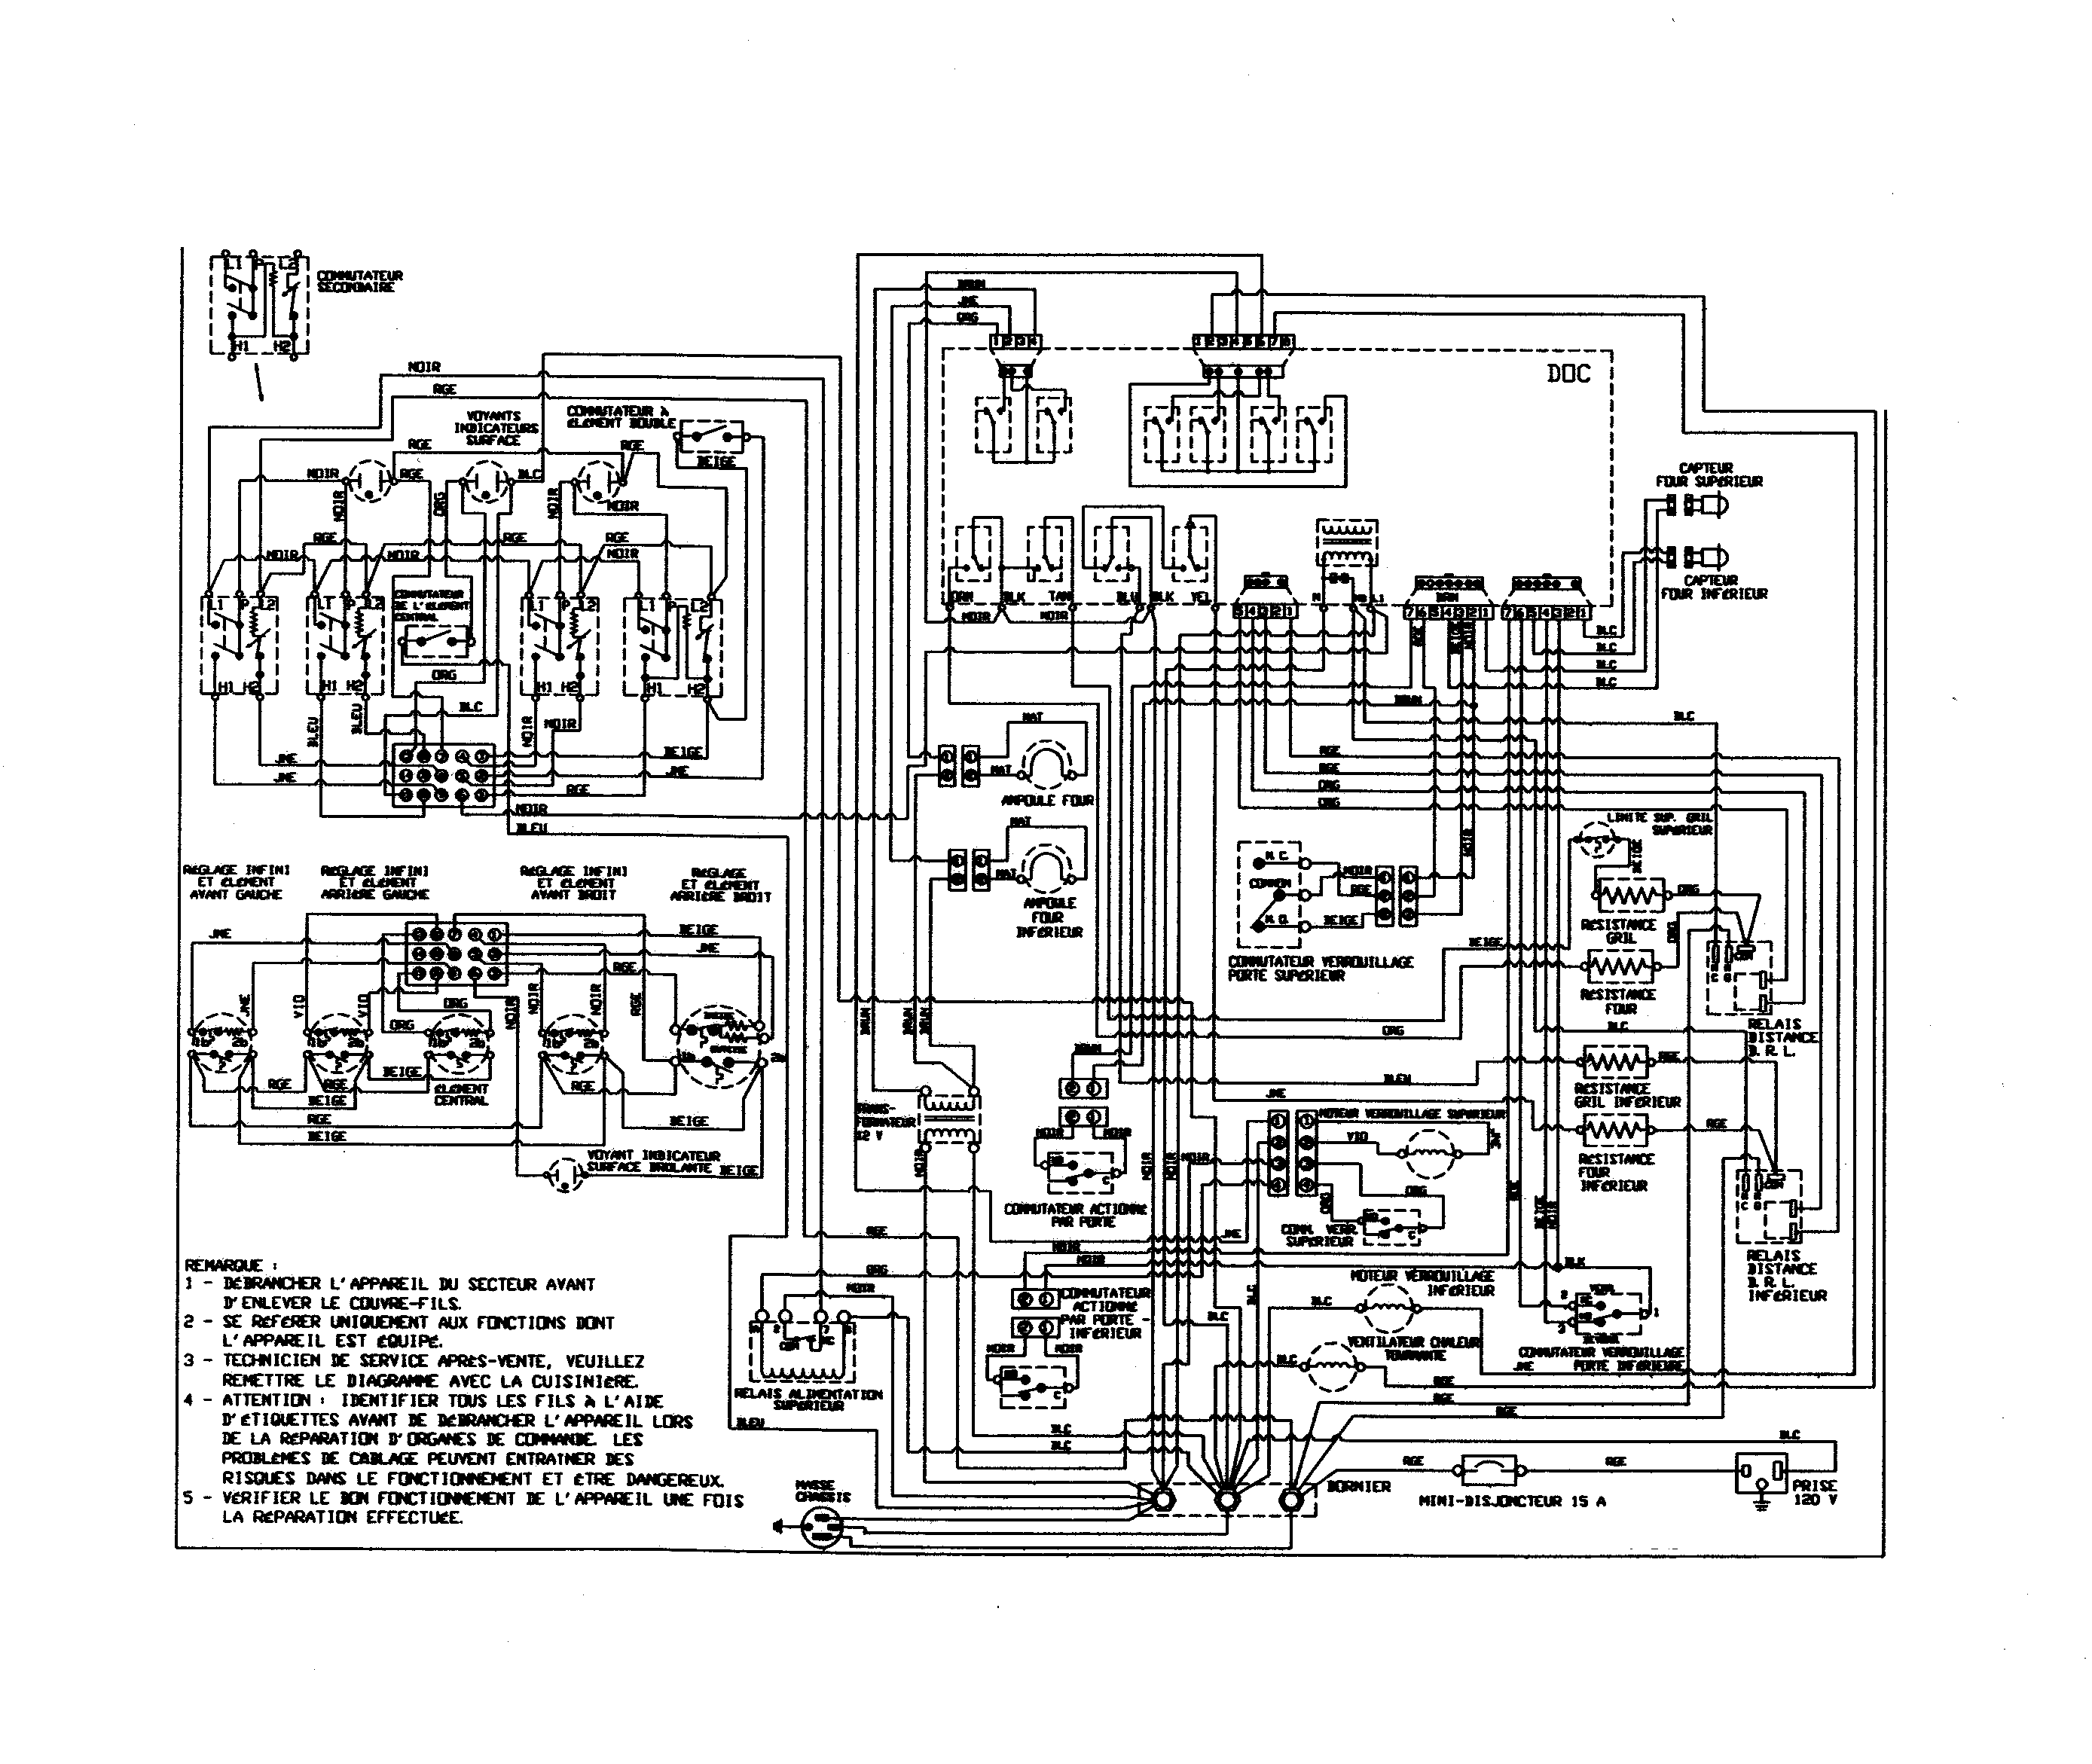 wiring diagram for ge oven model number jckp16gs-1